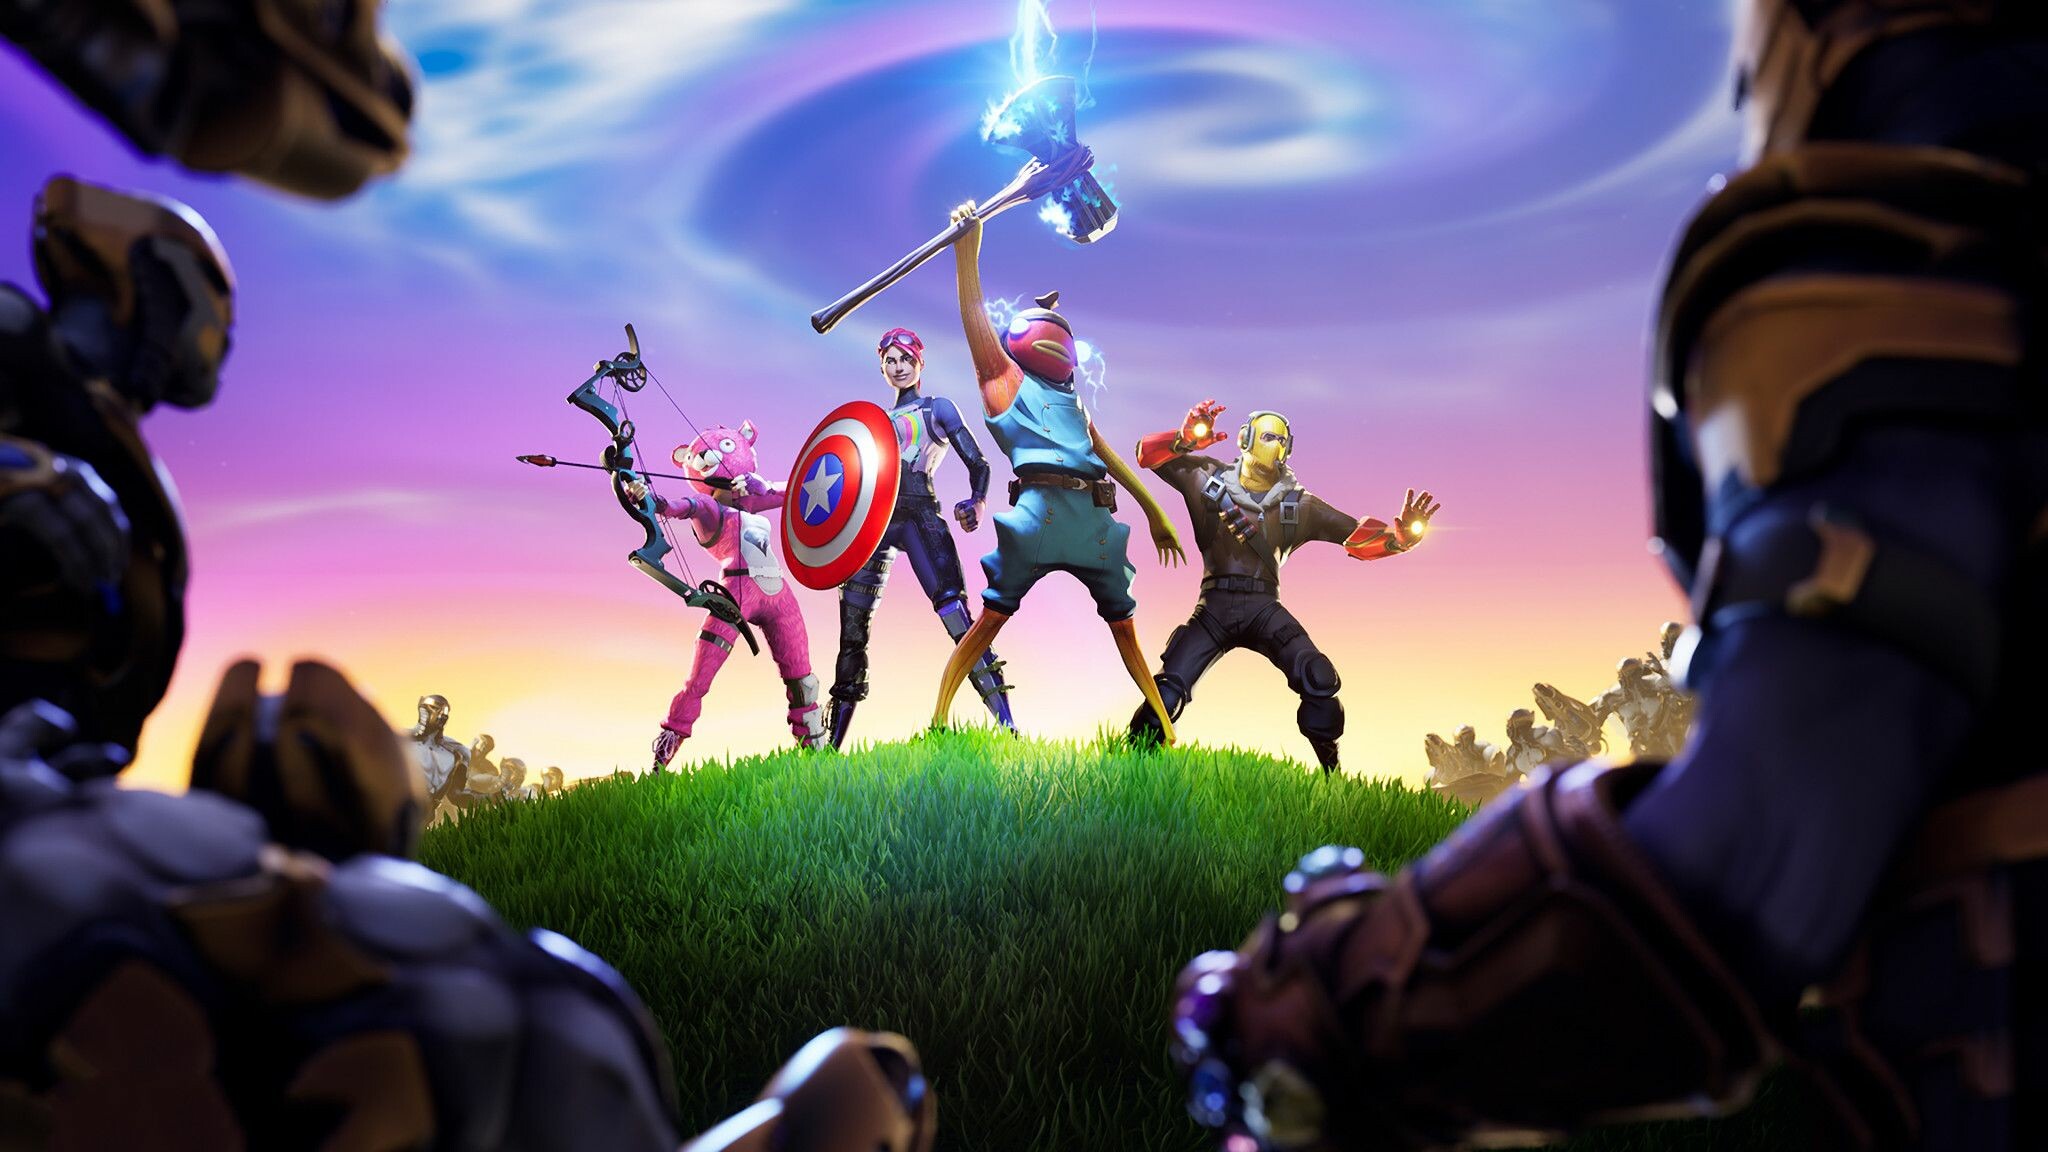 Fortnite: A popular free-to-play PC game, Distinguishes itself with cartoon-style graphics. 2050x1160 HD Wallpaper.